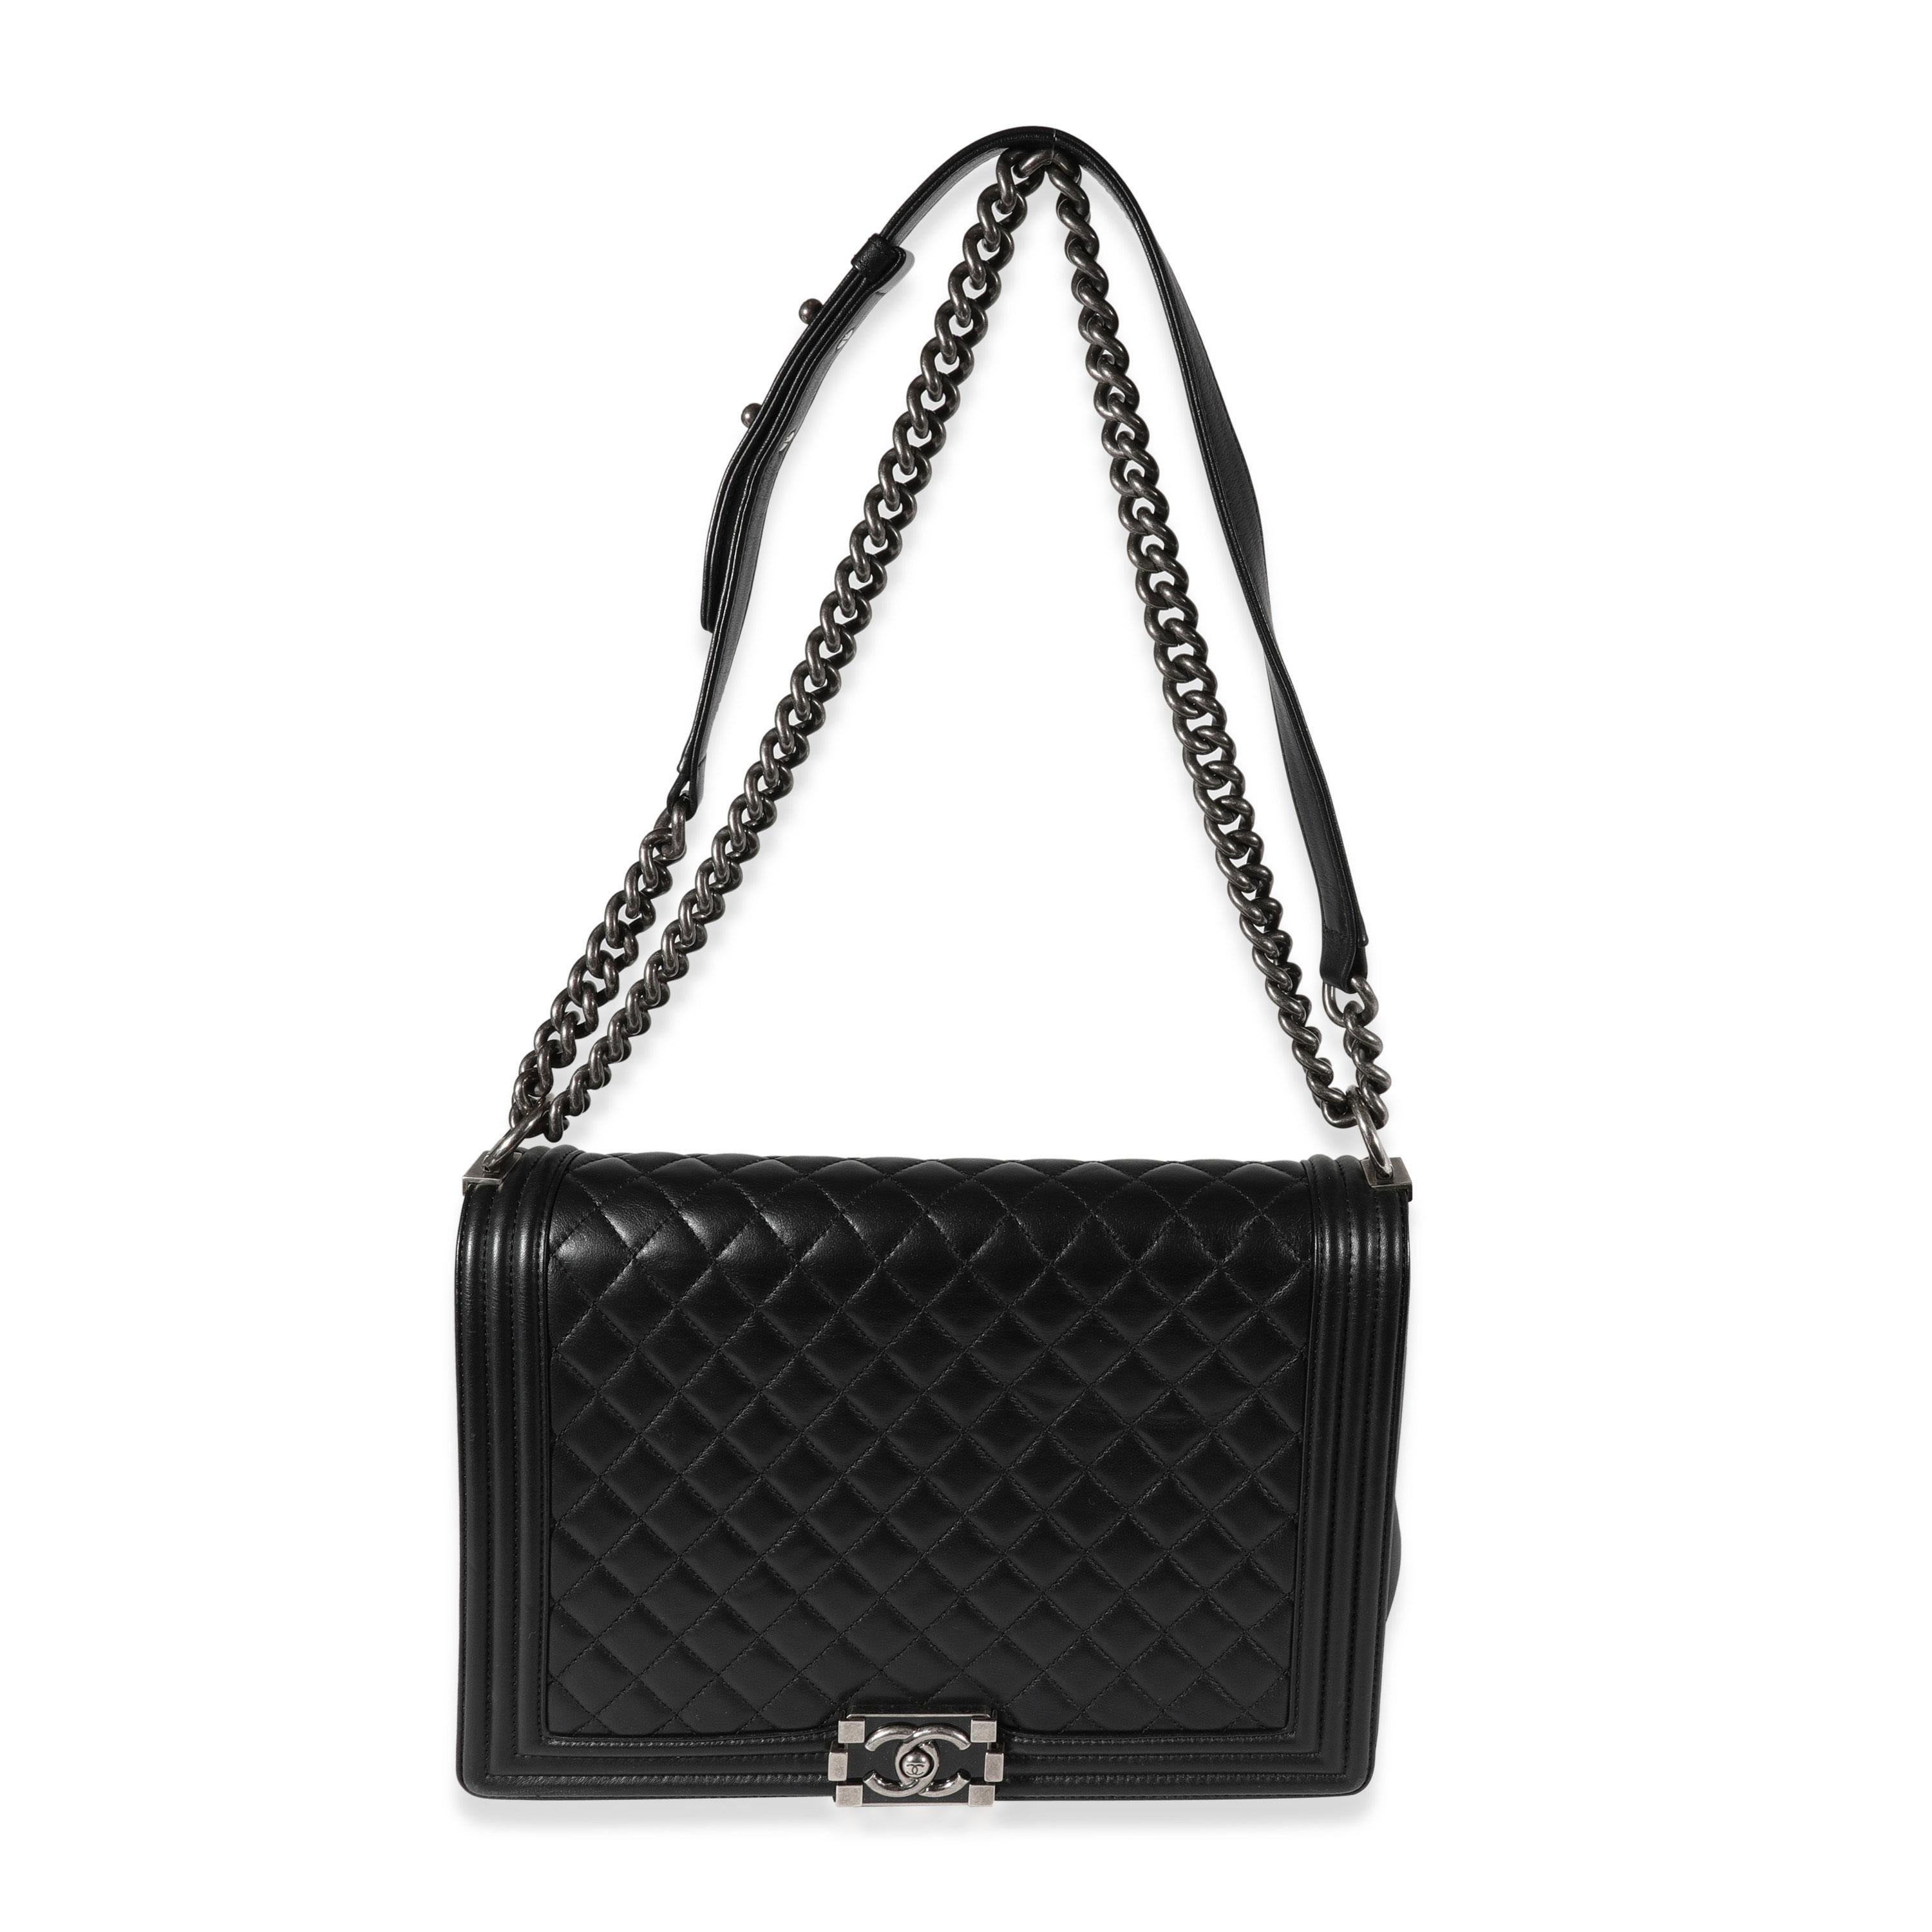 Listing Title: Chanel Black Quilted Lambskin Large Boy Bag
SKU: 121949
Condition: Pre-owned 
Handbag Condition: Good
Condition Comments: Good Condition. Scuffing to corners and exterior. Scuffing to interior leather. Discoloration and marks to